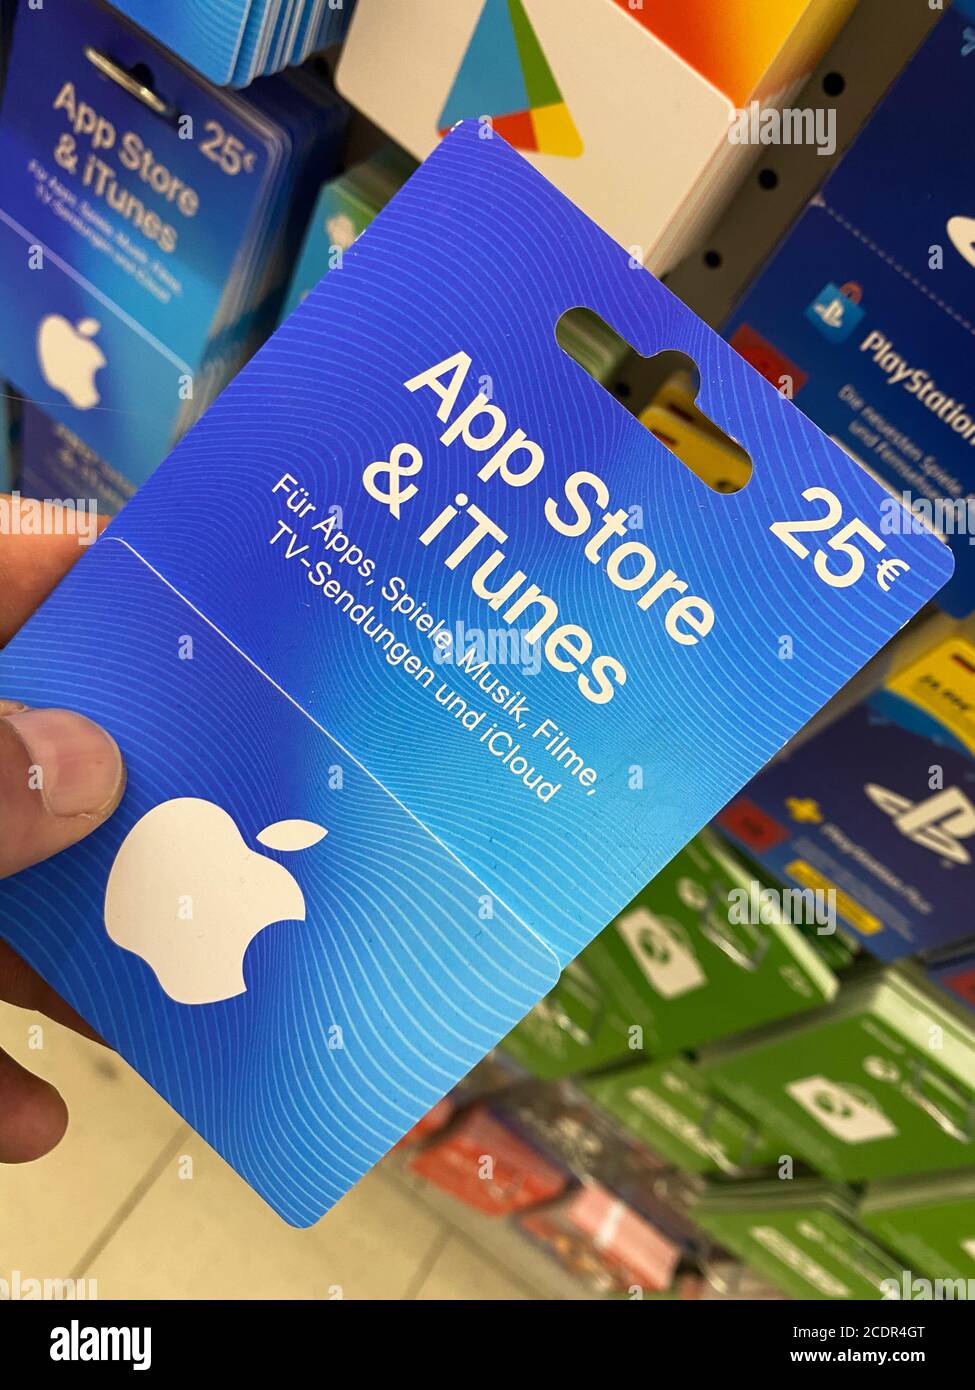 Viersen, Germany - July 9. 2020: View on apple itunes and app store gift  voucher card hold by hand in german supermarket Stock Photo - Alamy